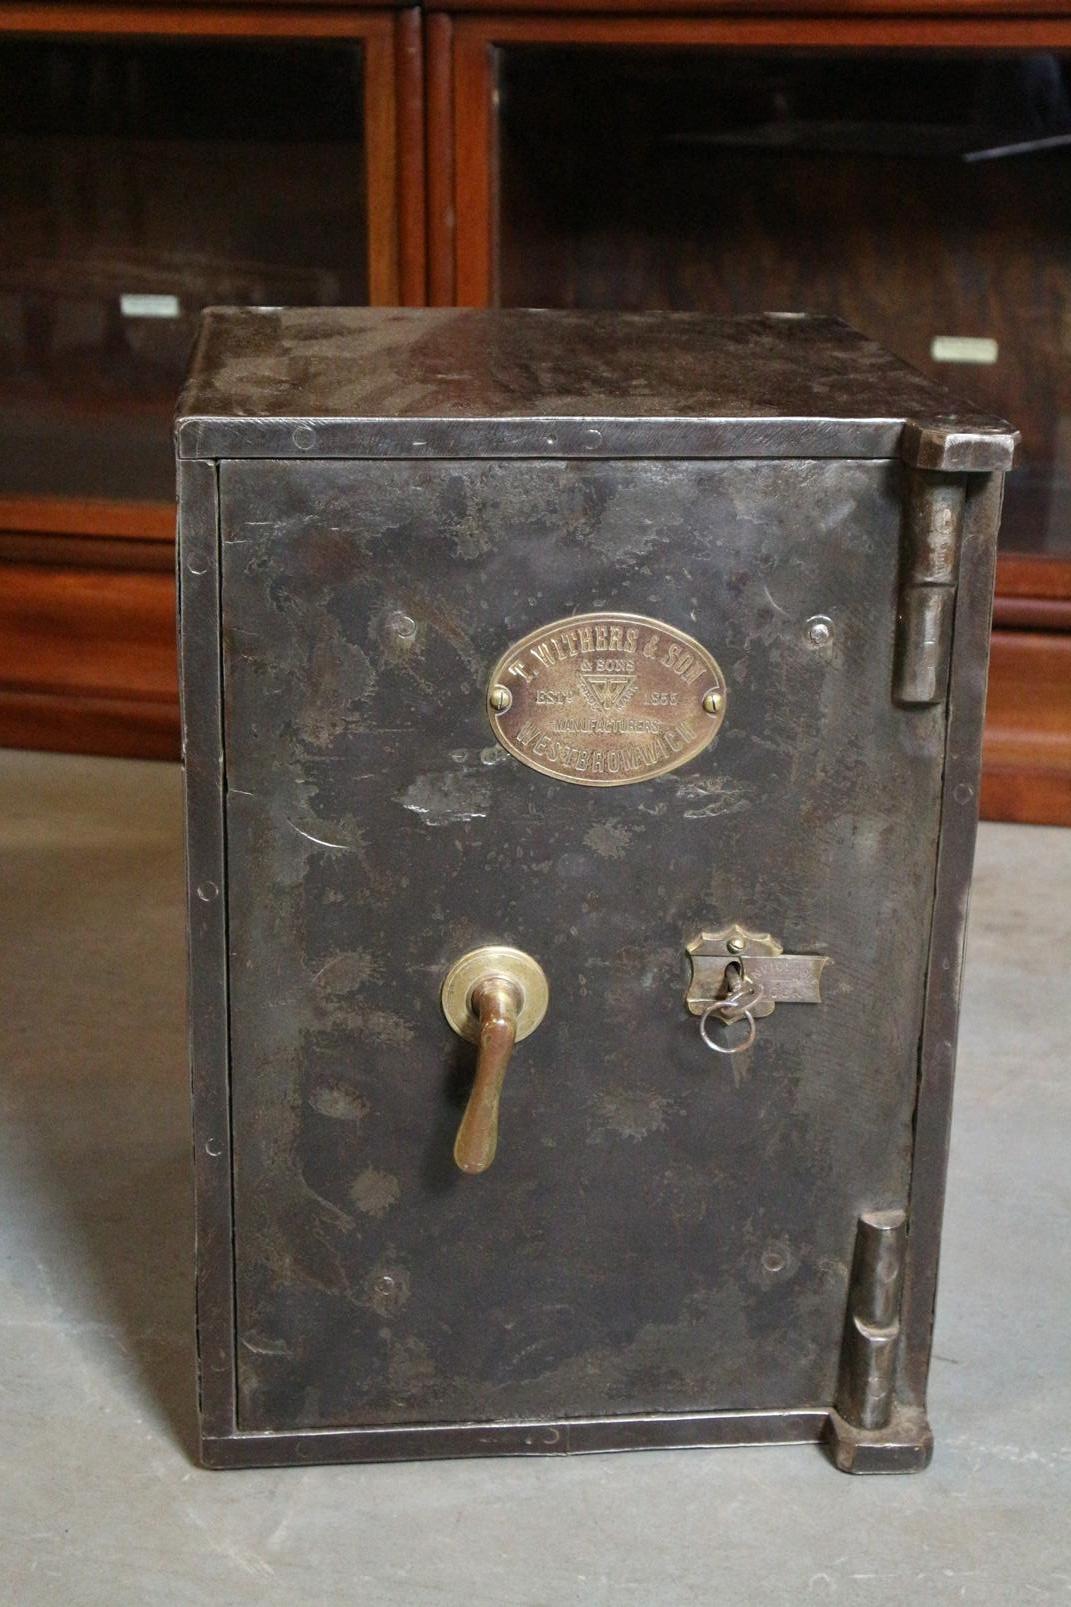 Antique English vault with drawer. In good condition. With key and working lock.

Maker: T Withers and Son

Origin: England, Westbromwich

Period circa 1880-1900

Size: W. 36 cm, D.36 cm, H.52 cm Weight +/- 70 kg.